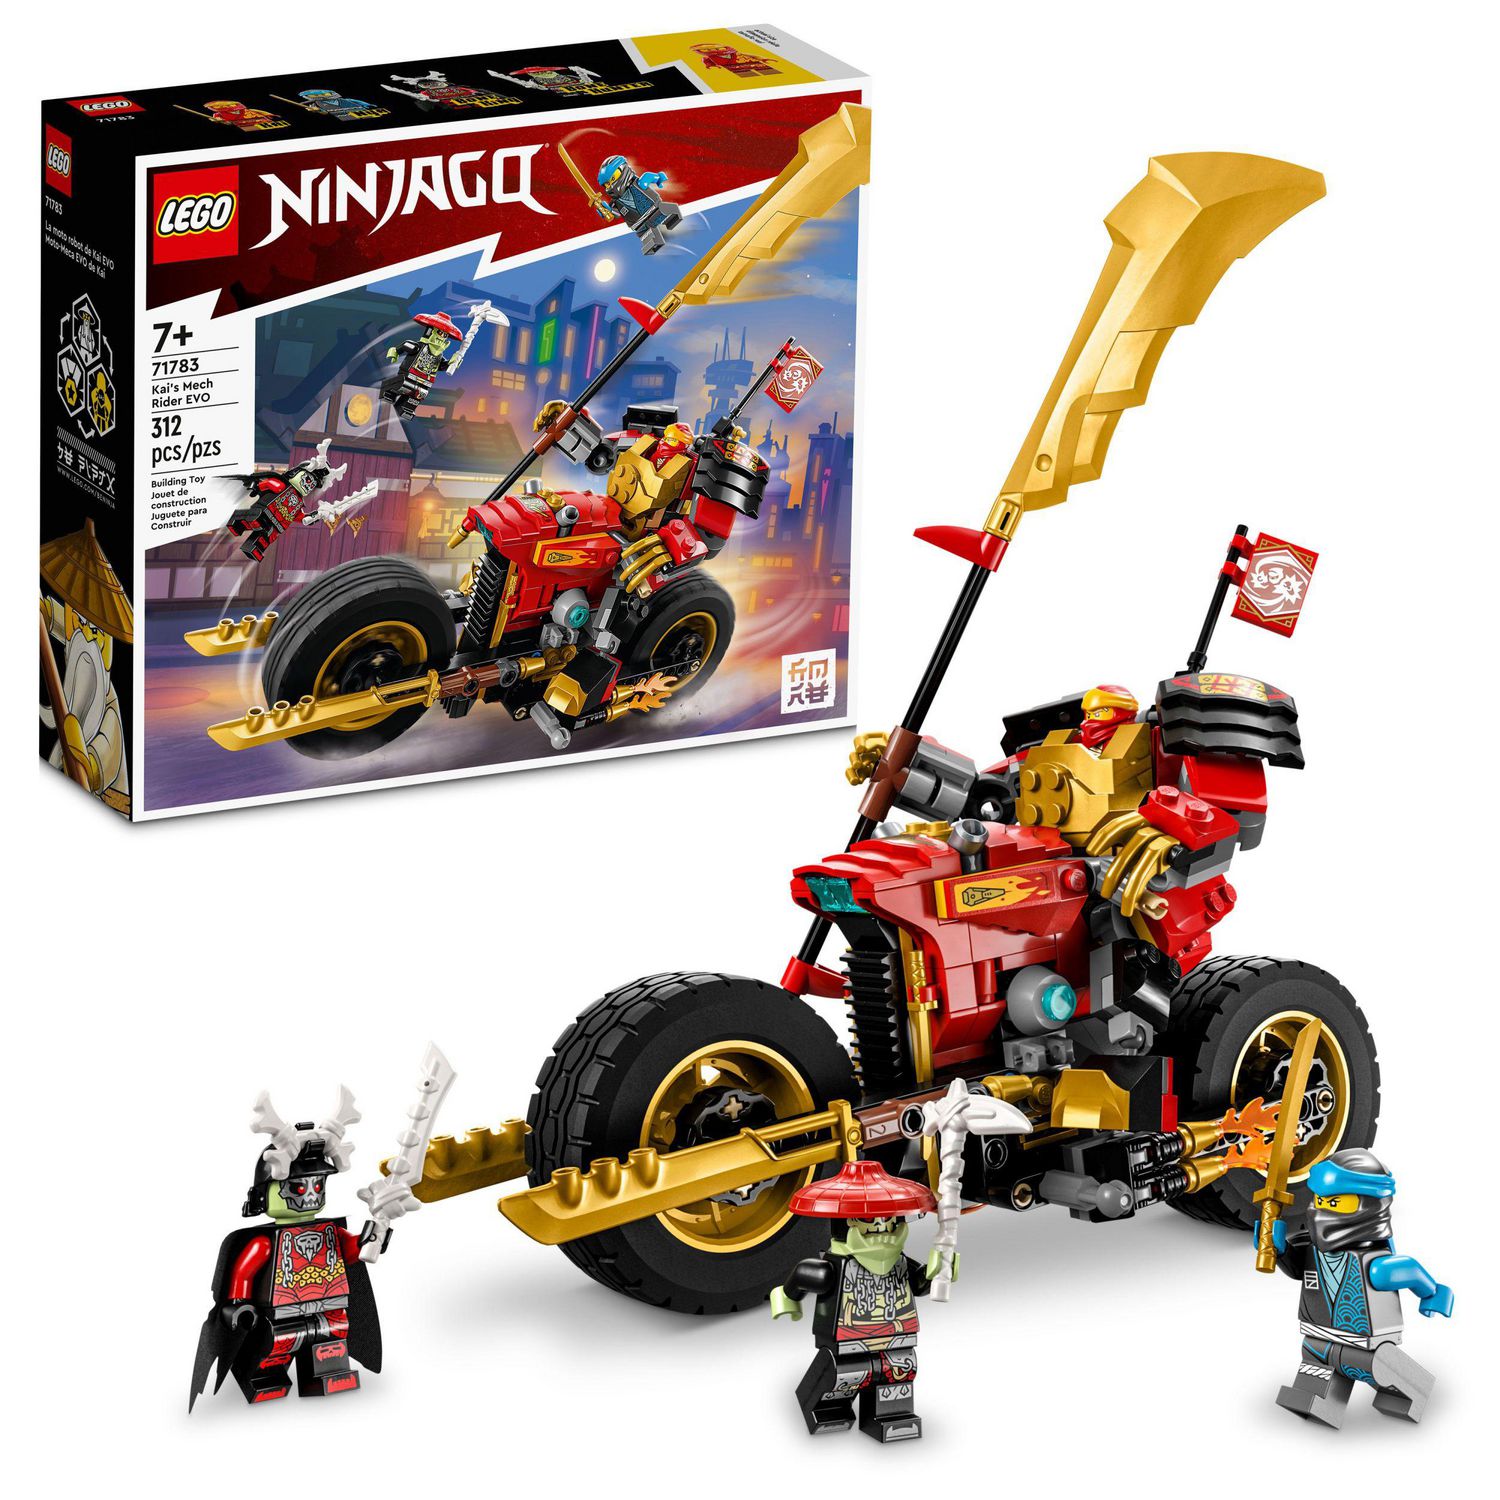 LEGO NINJAGO Kai's Mech Rider EVO 71783, Upgradable Ninja Motorbike Toy,  Mech Action Figure and 2 Bone Warrior Minifigures, Toys for Kids 7 Plus  Years Old, Includes 312 Pieces, Ages 7+ 